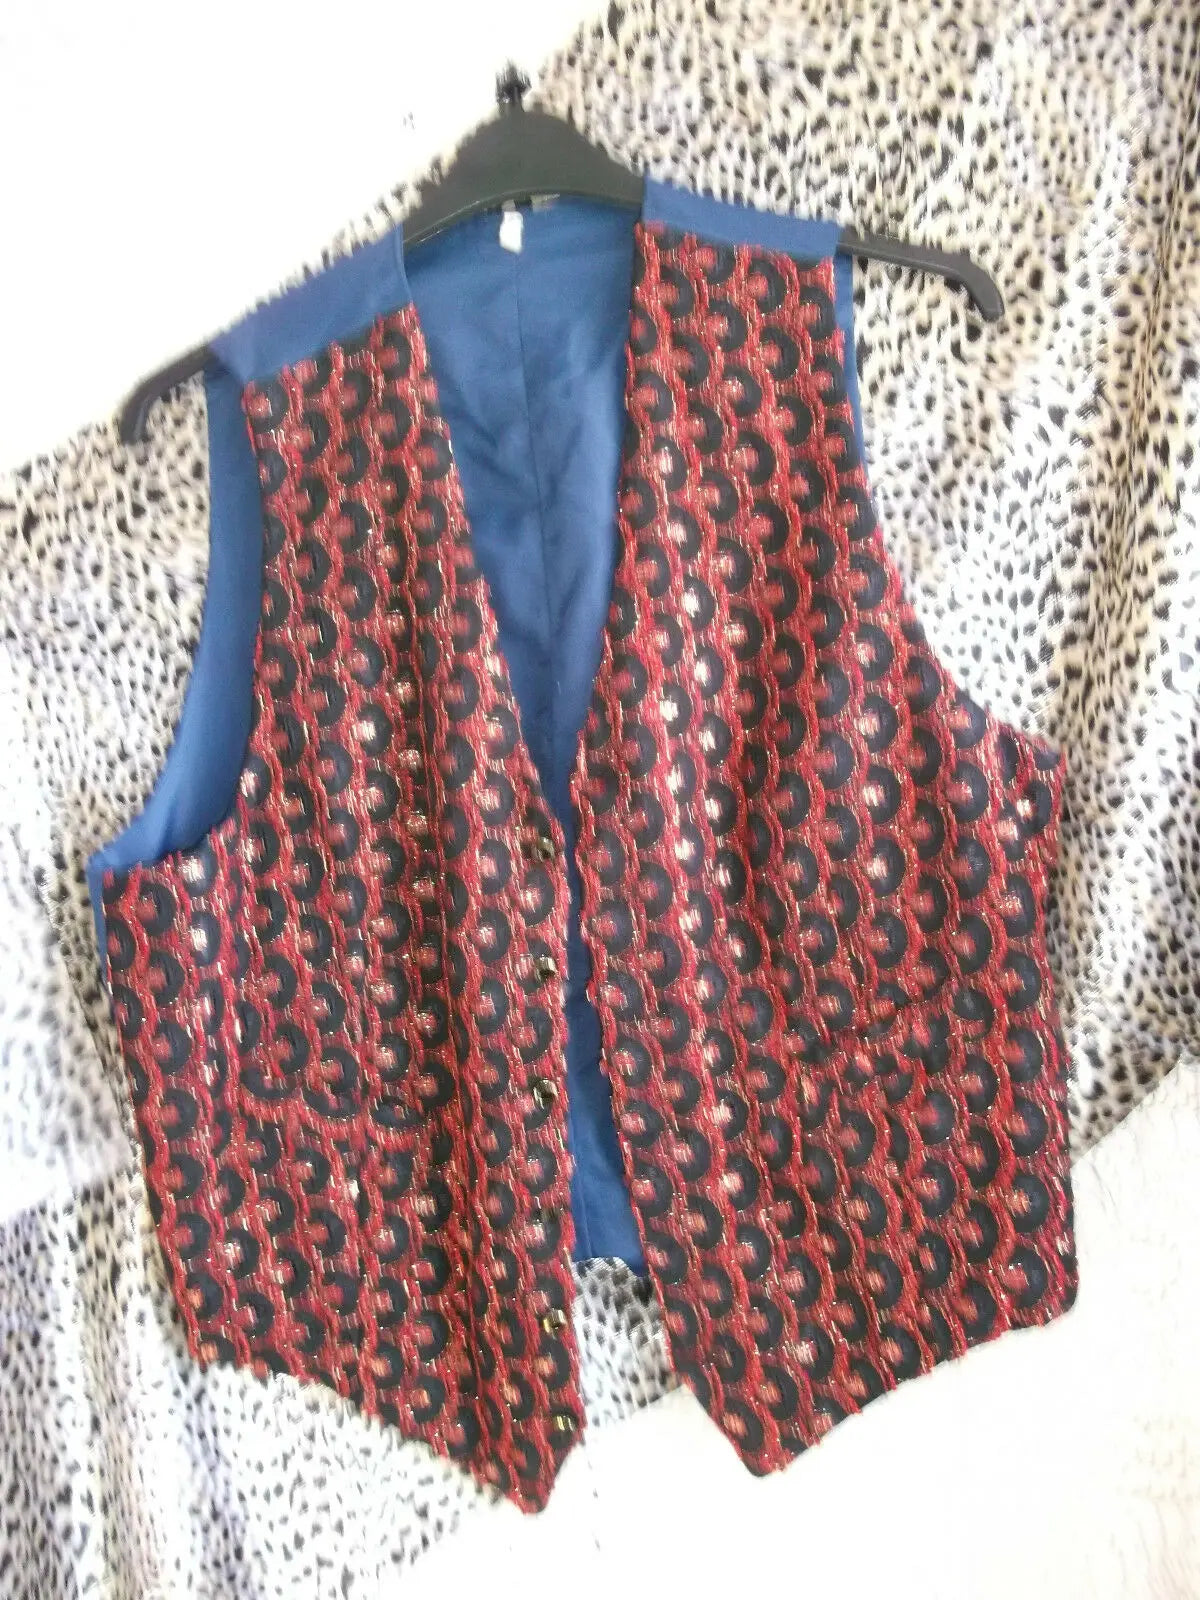 steampunk Unisex Funky  waistcoat-2 designs available.size 36" chest/XL Unbranded